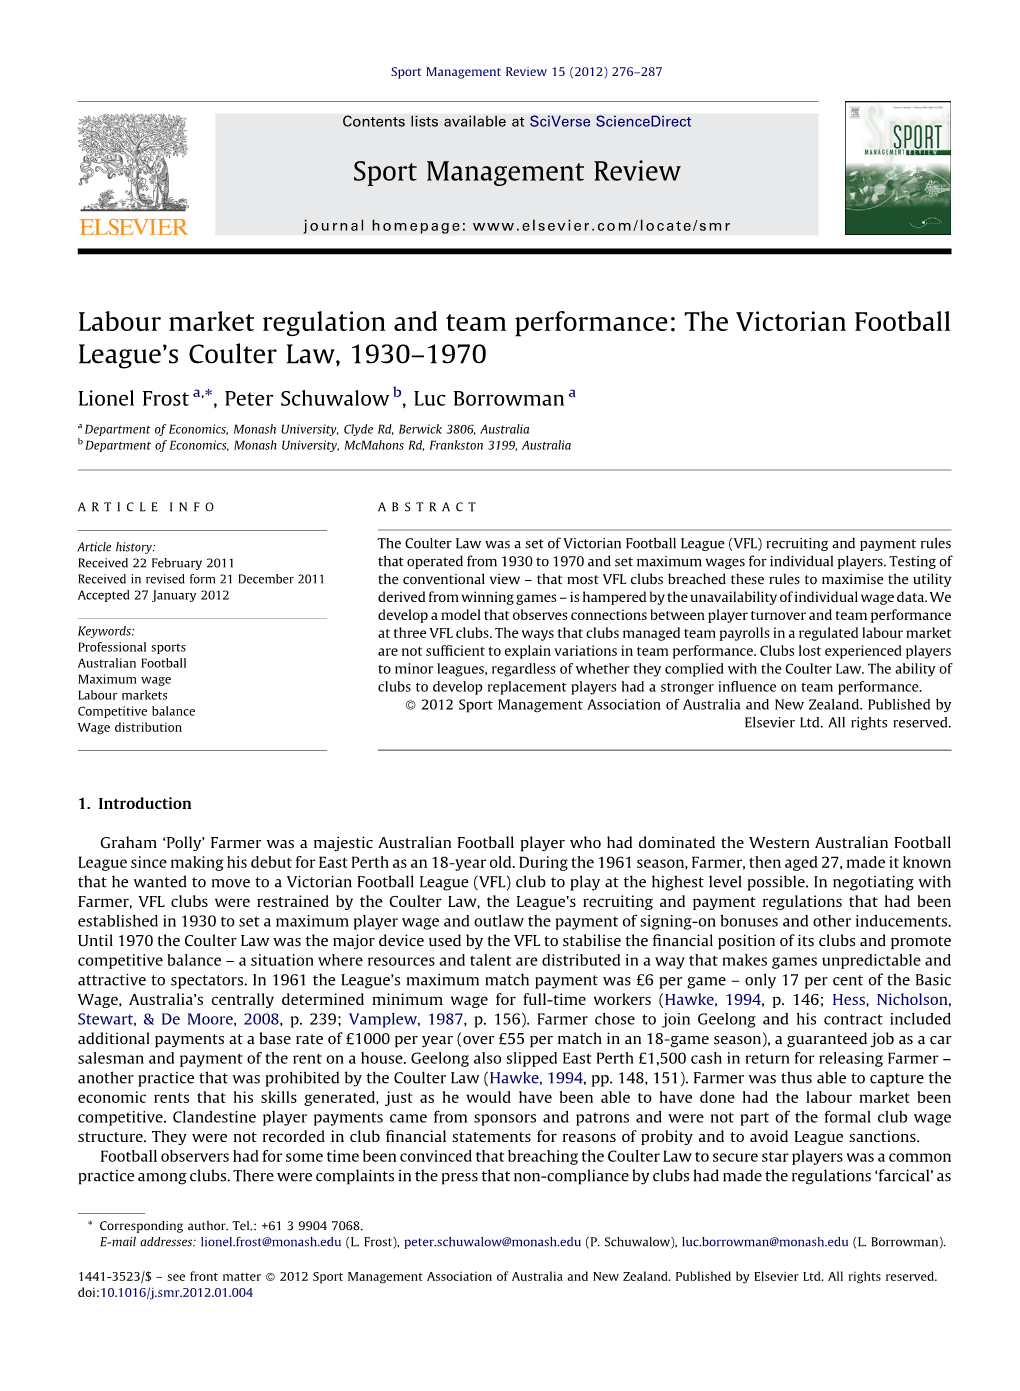 Labour Market Regulation and Team Performance: the Victorian Football